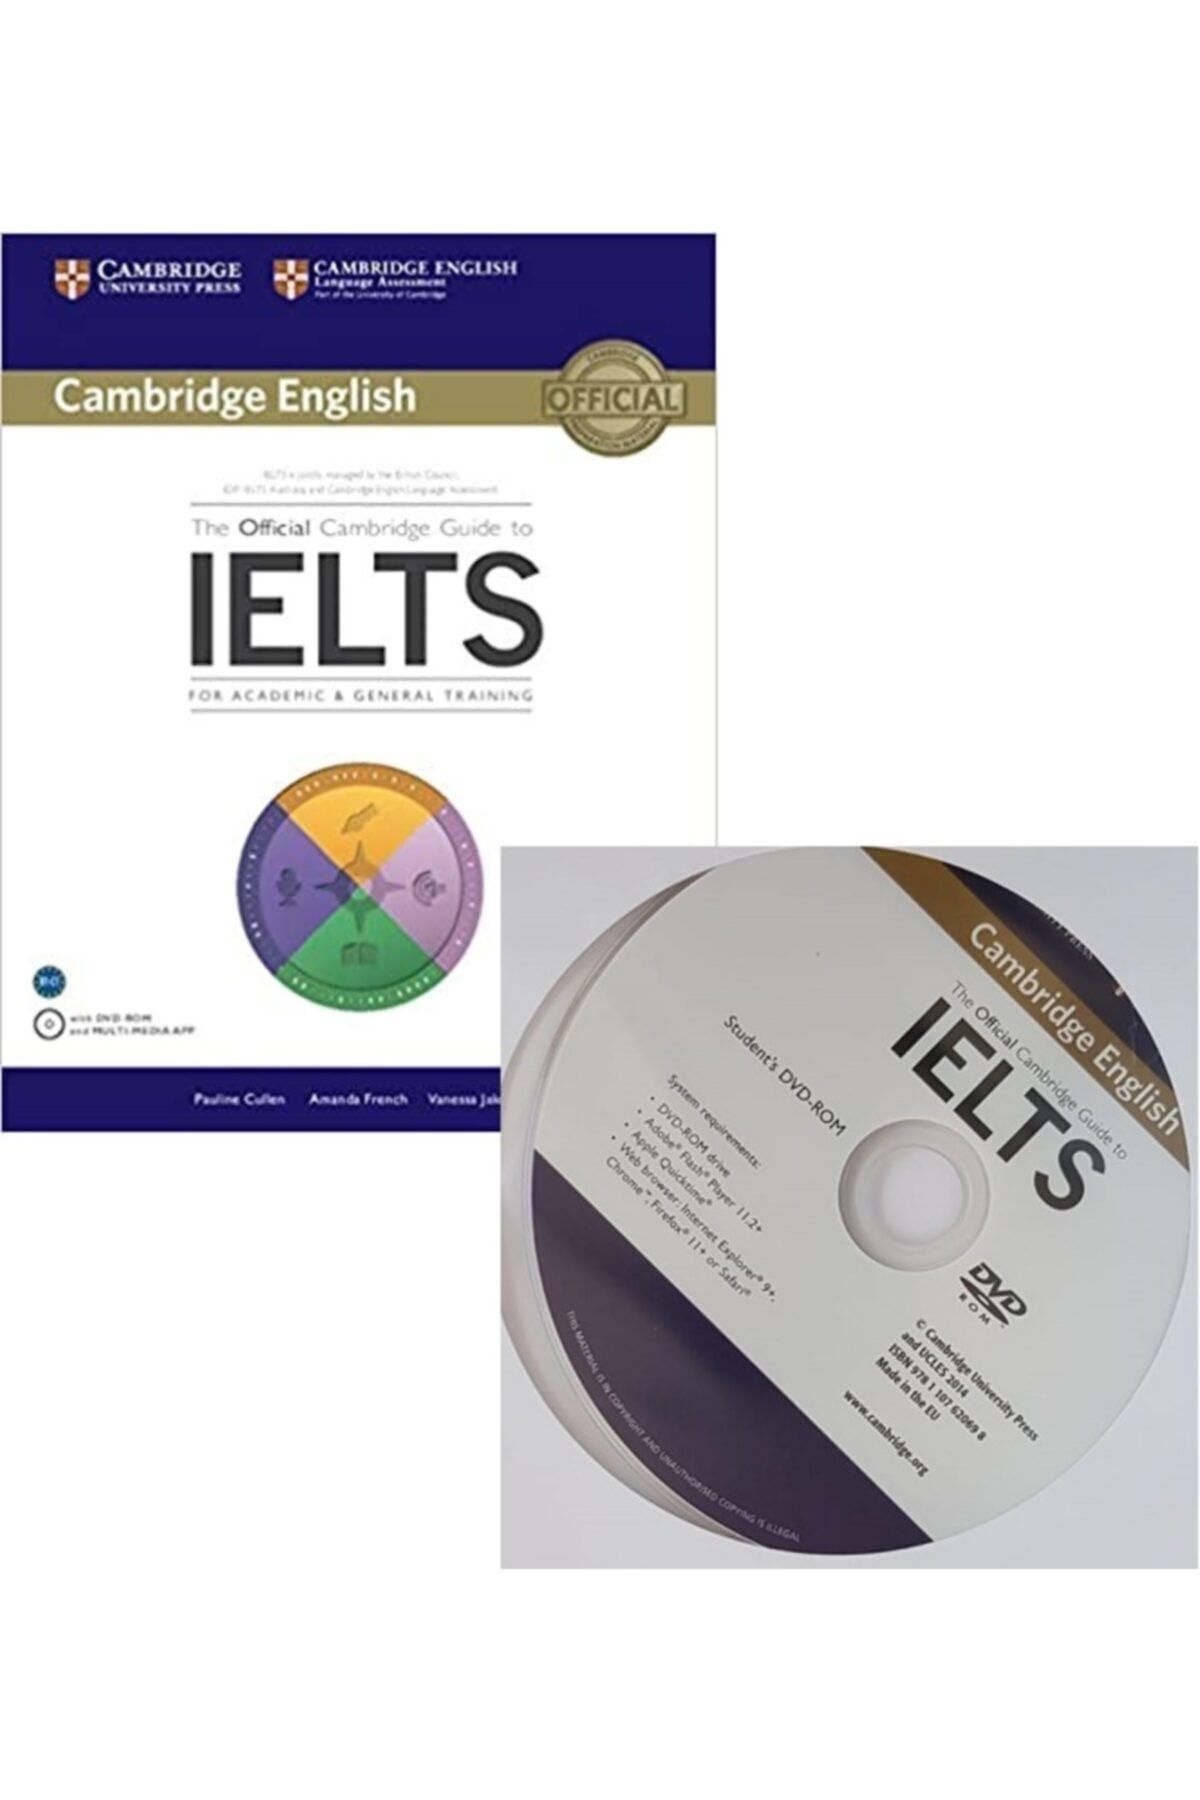 Cambridge University Ielts Official Cambridge Guide To Academic And General Education With Answers On Dvd Rom